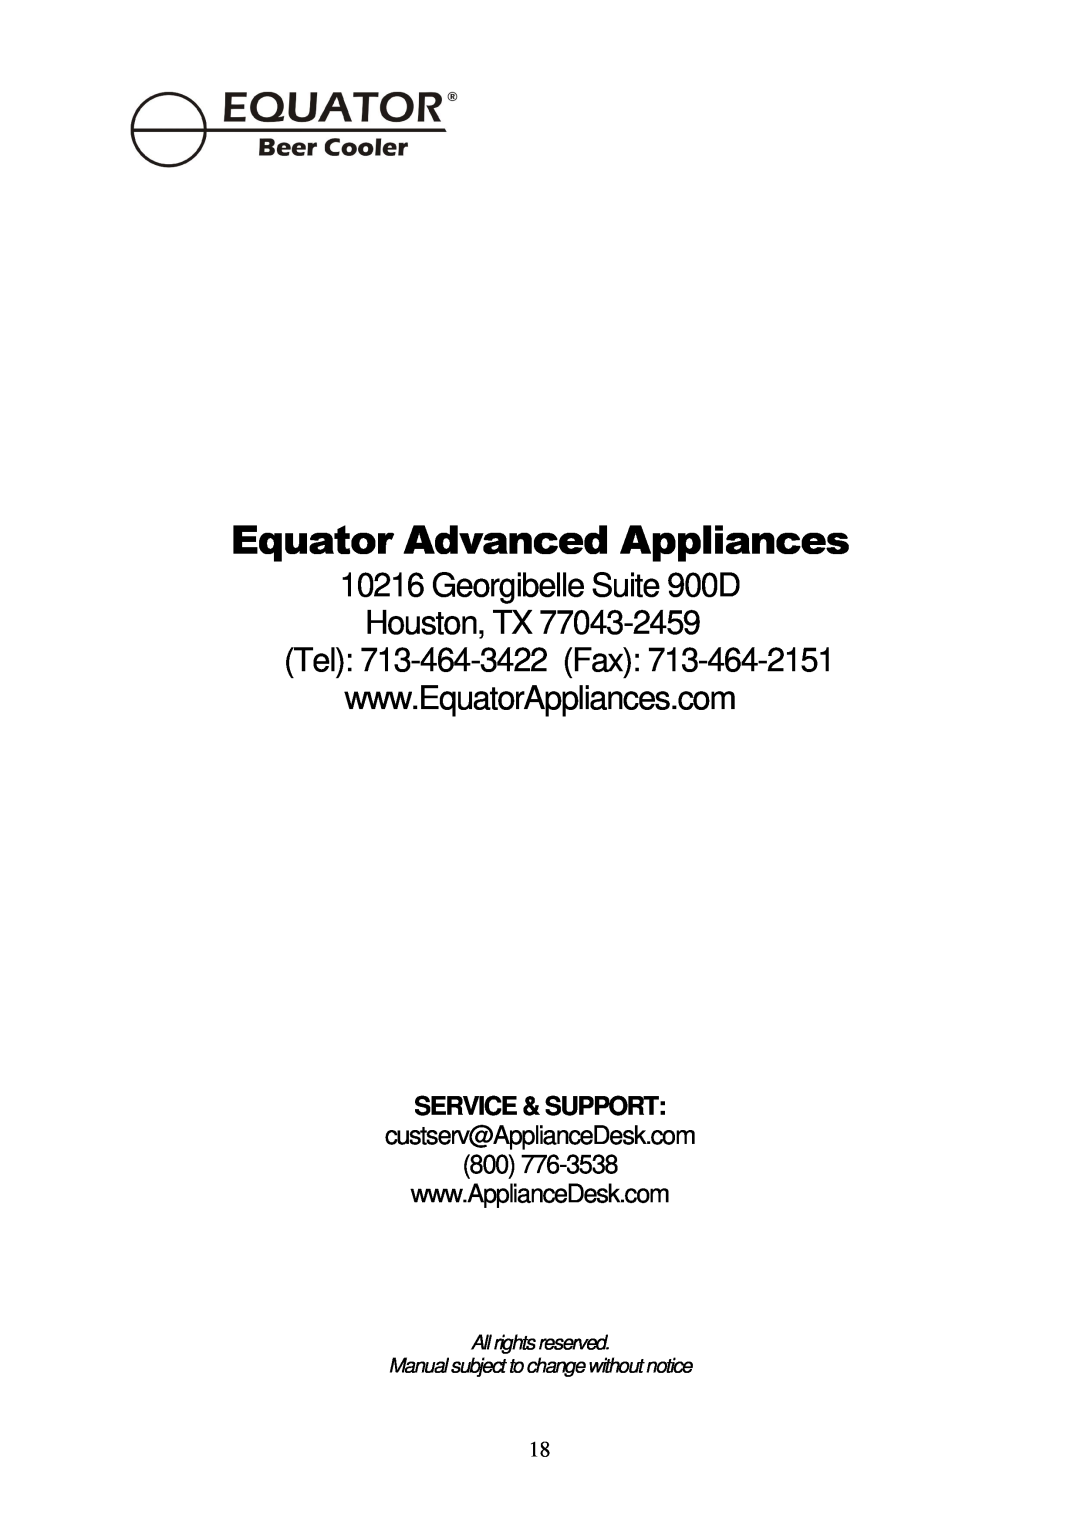 Equator BCR 500 Equator Advanced Appliances, Georgibelle Suite 900D Houston, TX, Service & Support, All rights reserved 